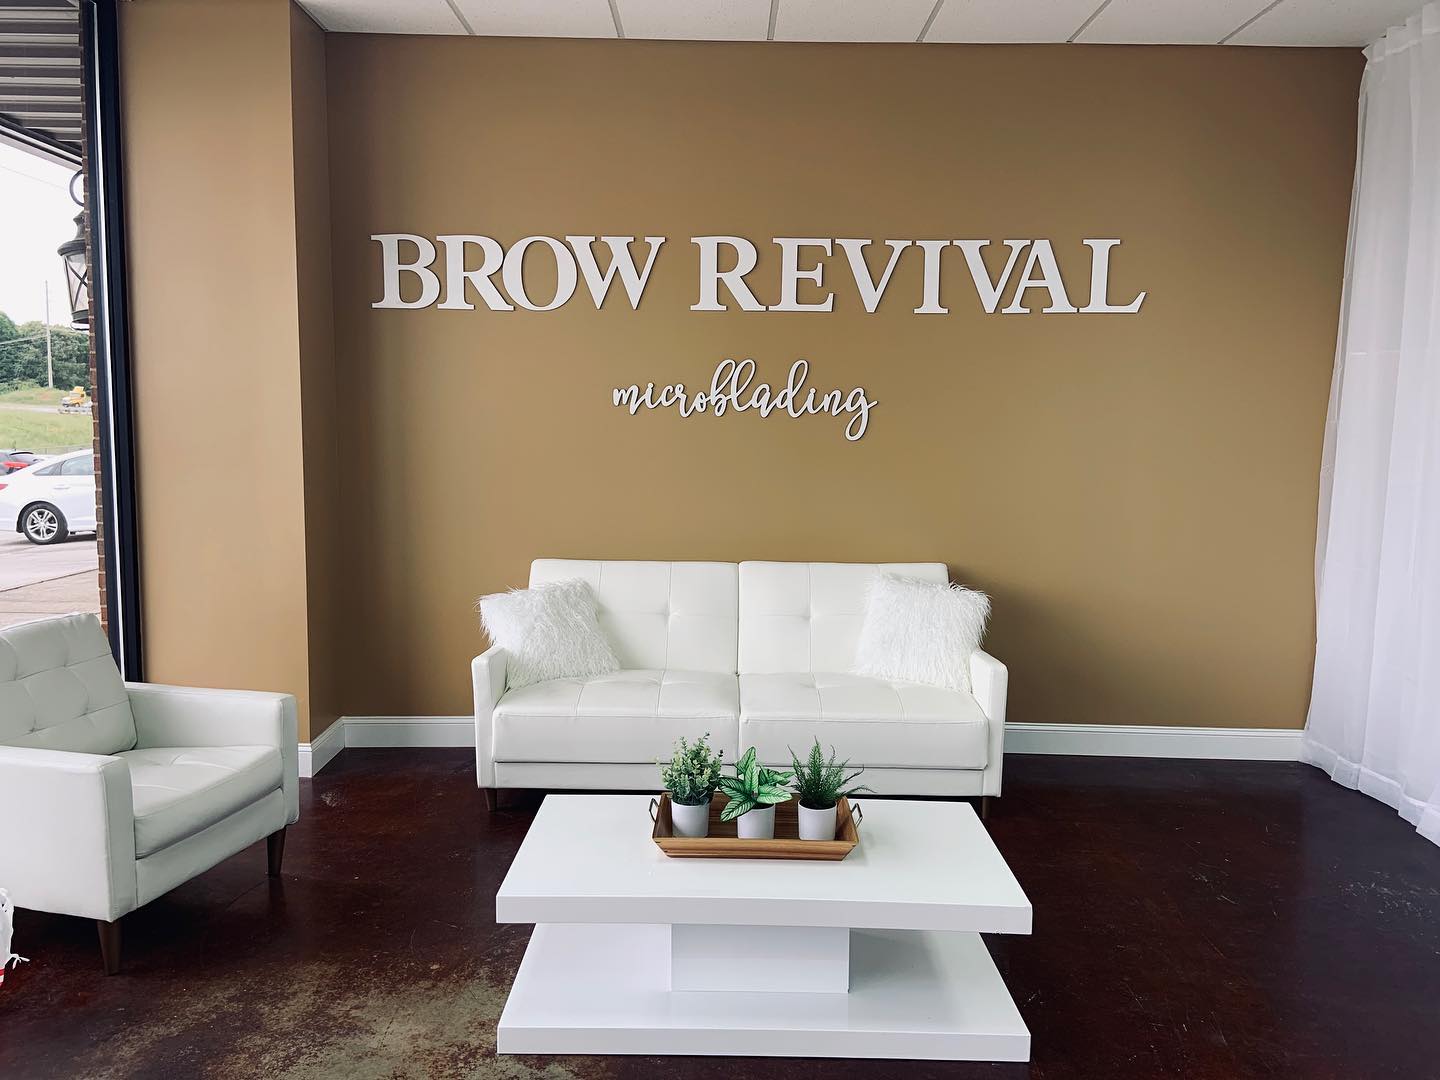 Business logo of Brow Revival Microblading